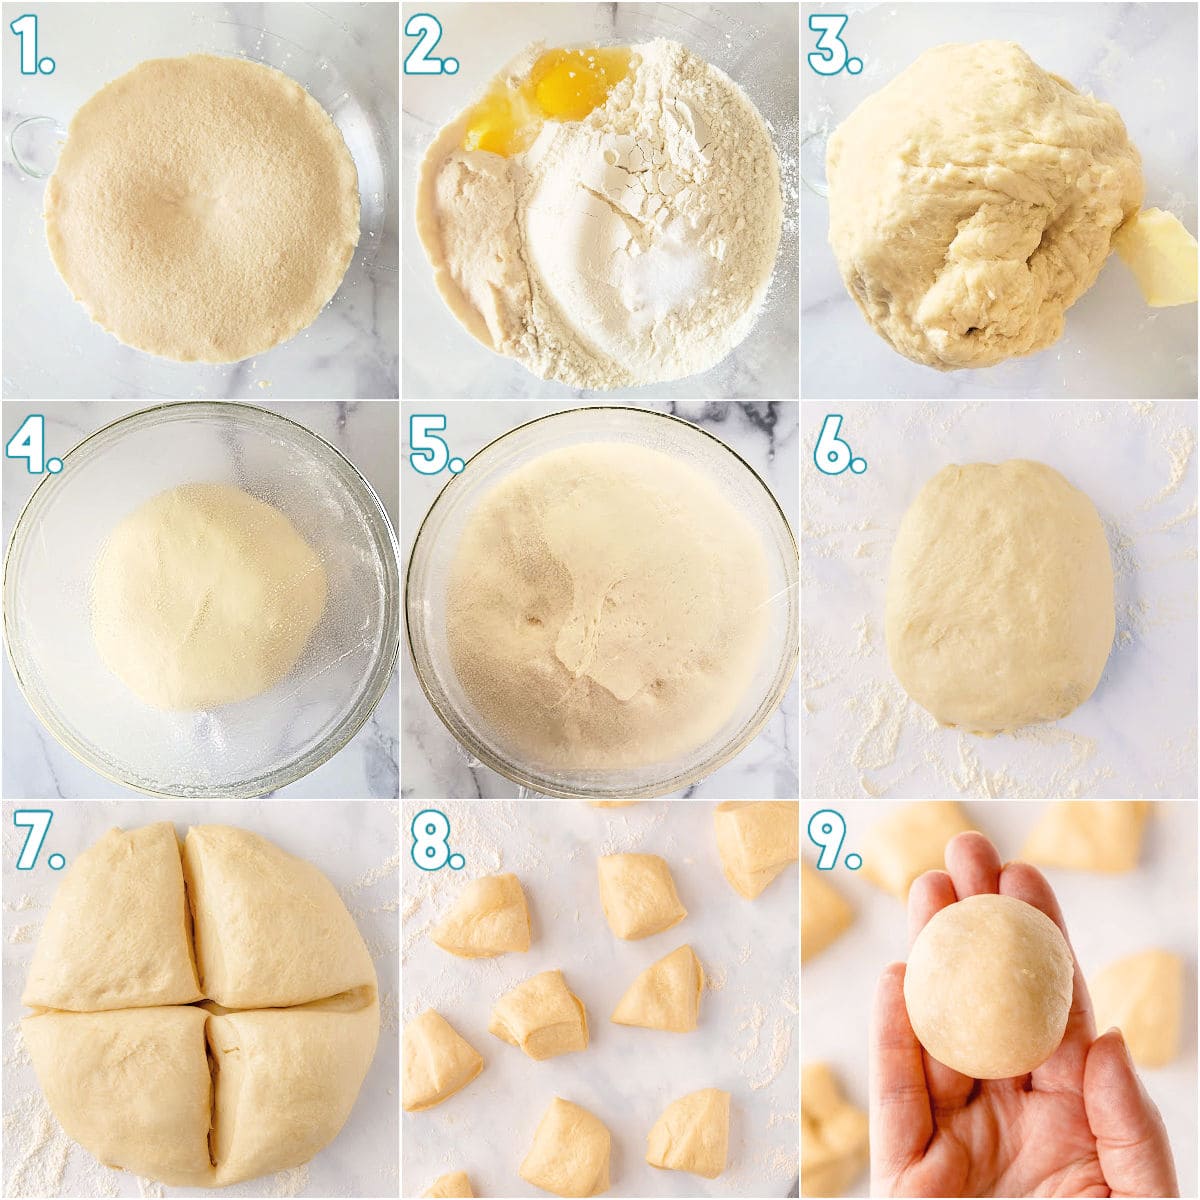 nine image collage showing how to make the jelly donut dough and form it into balls with step by step photos.